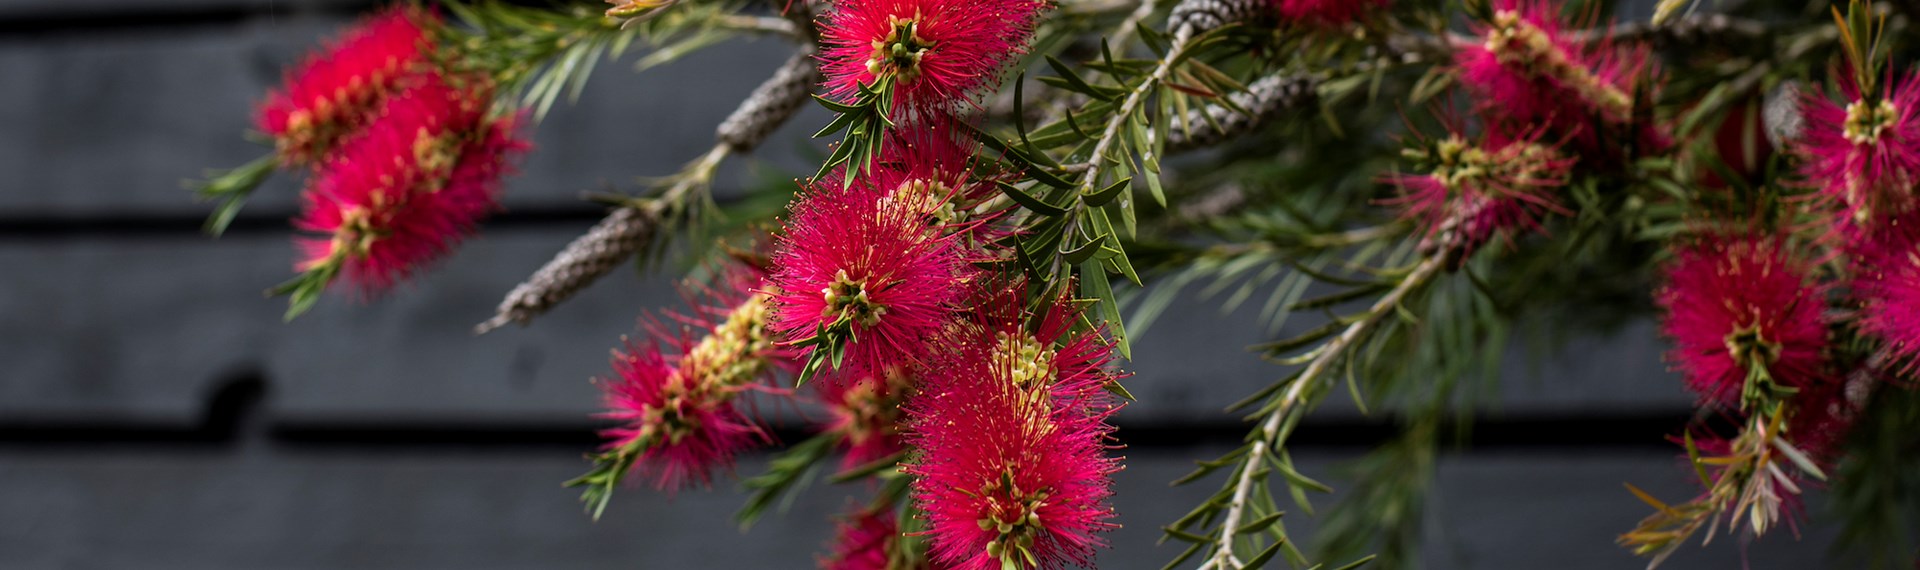 Pōhutukawa are a vibrant red flower that can be found around the Punga Cove property in the Marlborough Sounds in New Zealand's top of the South Island